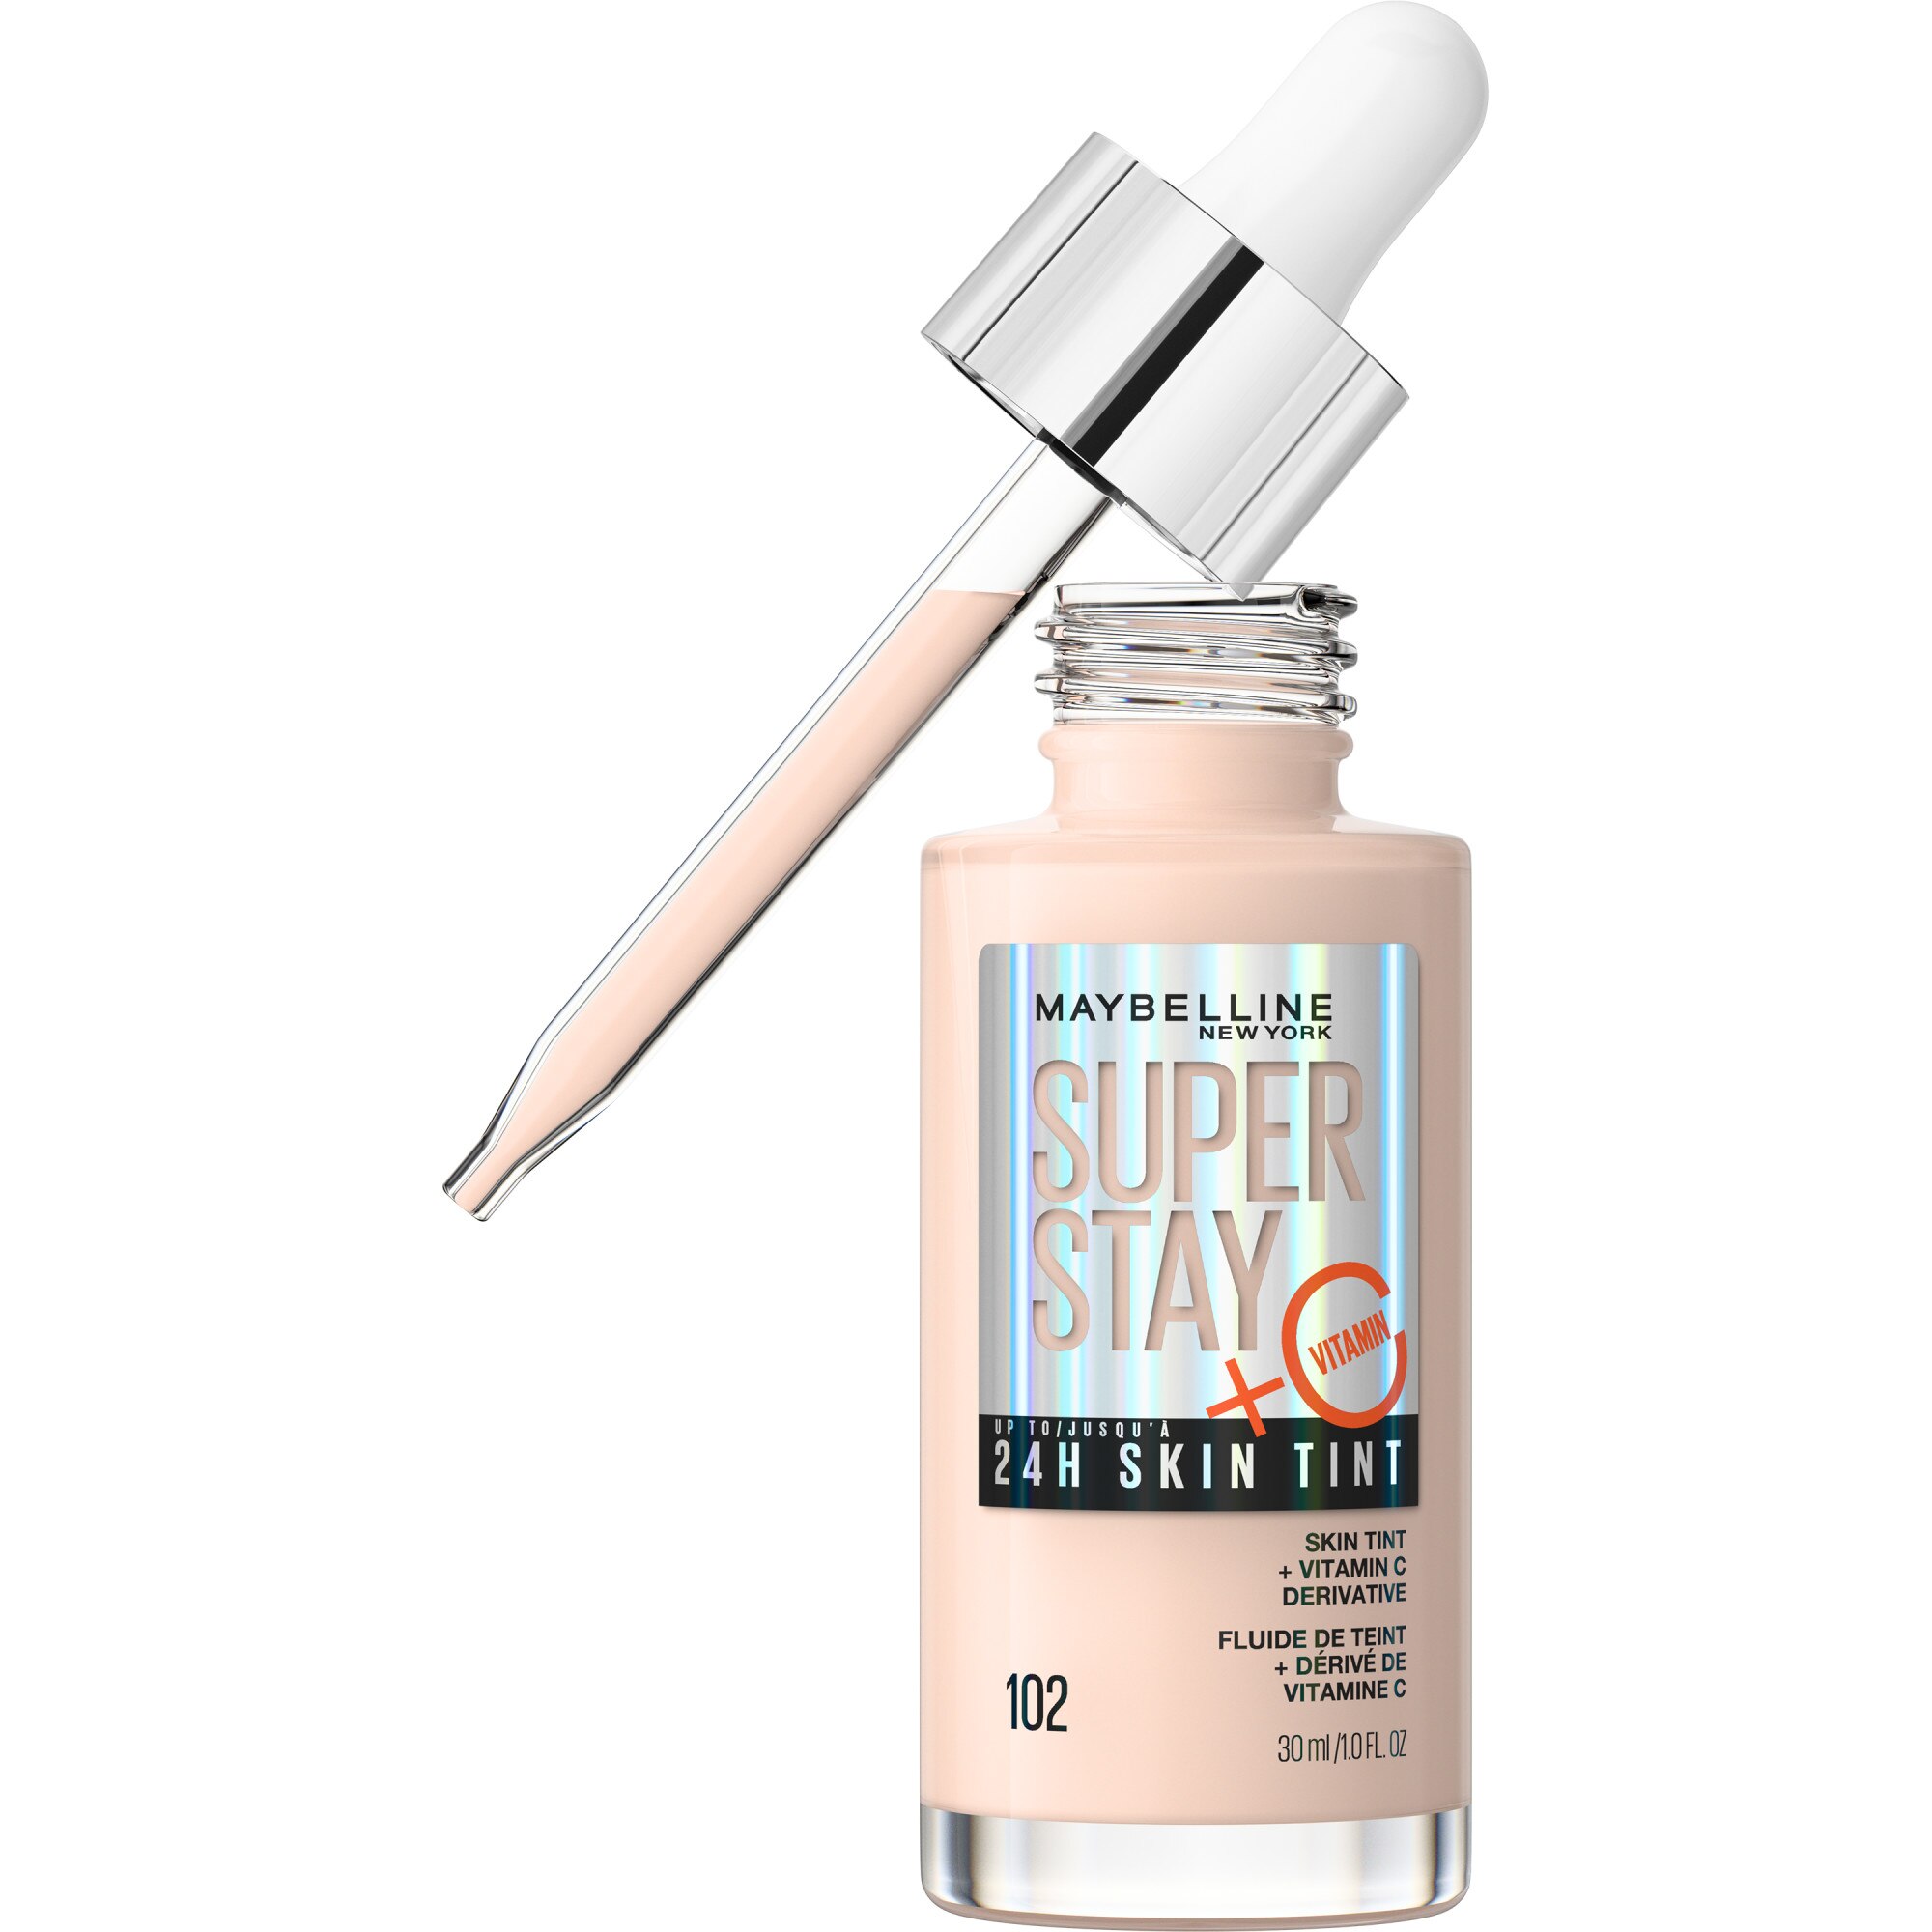 Maybelline New York Super Stay Up To 24HR Skin Tint With Vitamin C, 102, 1 Oz , CVS